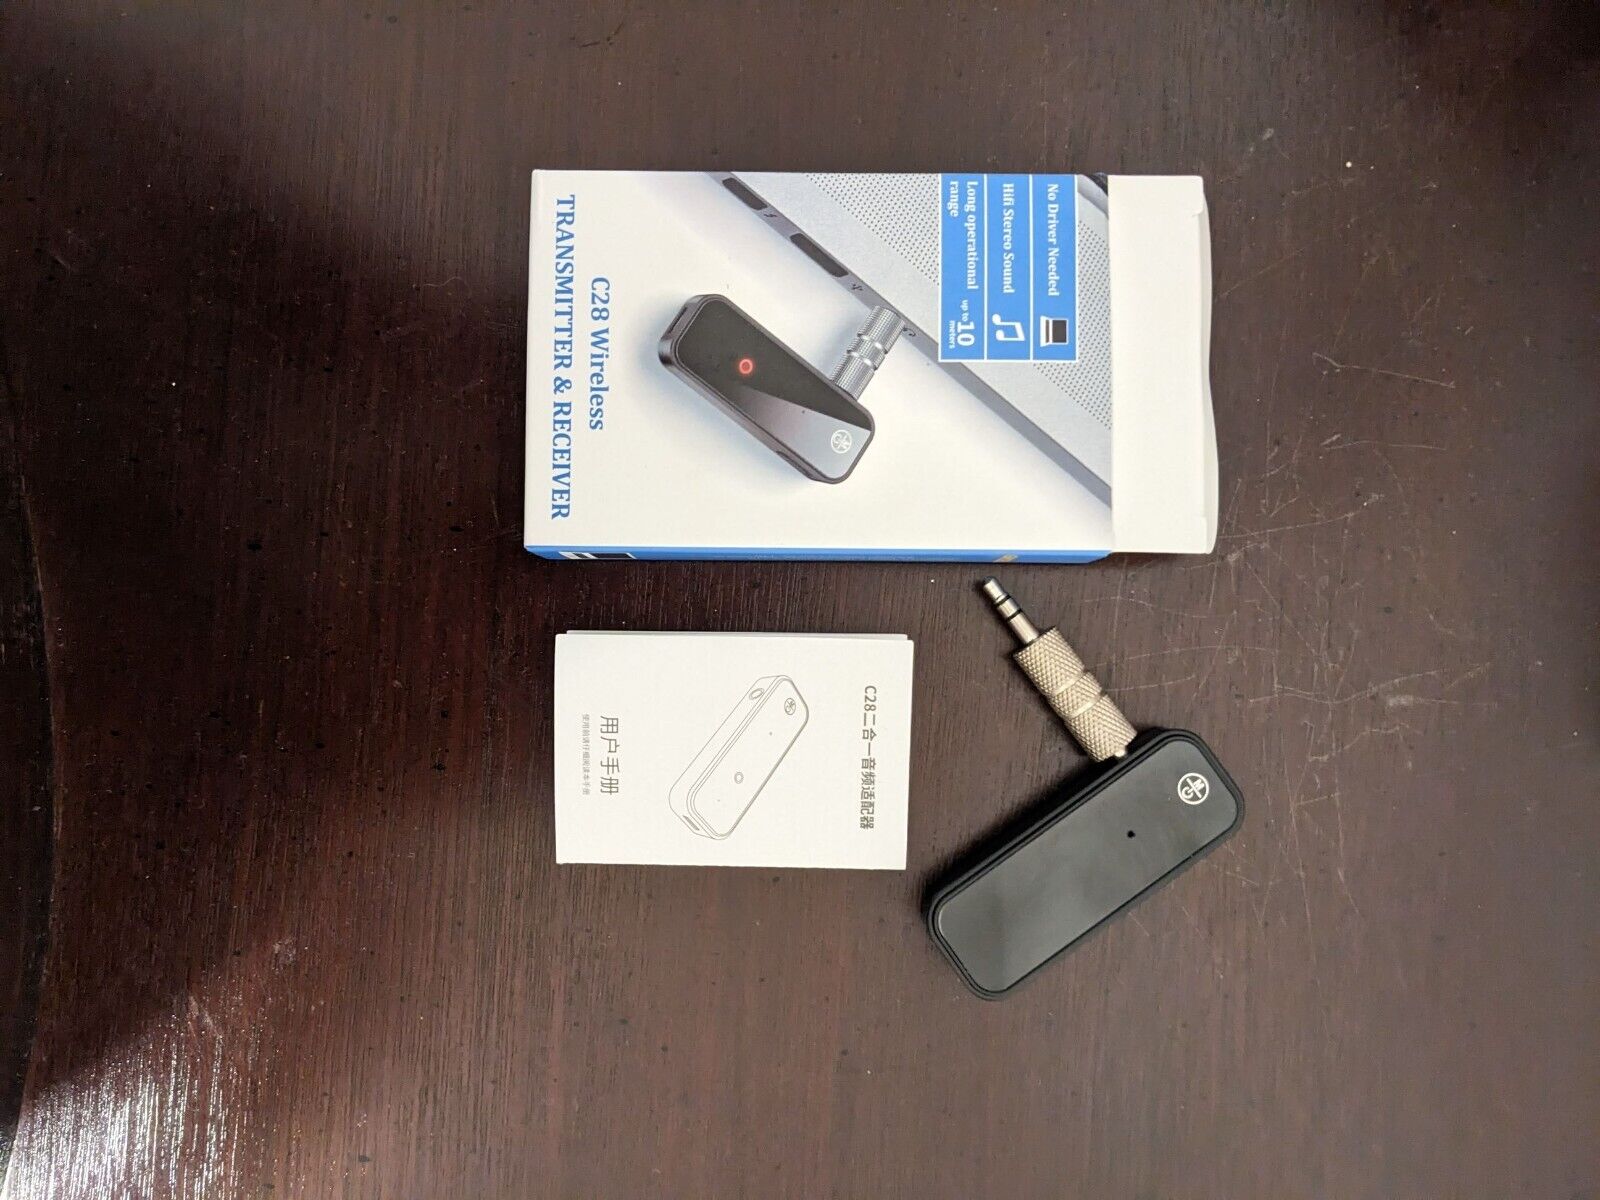 C28 Bluetooth Transmitter Receiver Wireless Adapter: 3.5mm Aux Jack Stereo